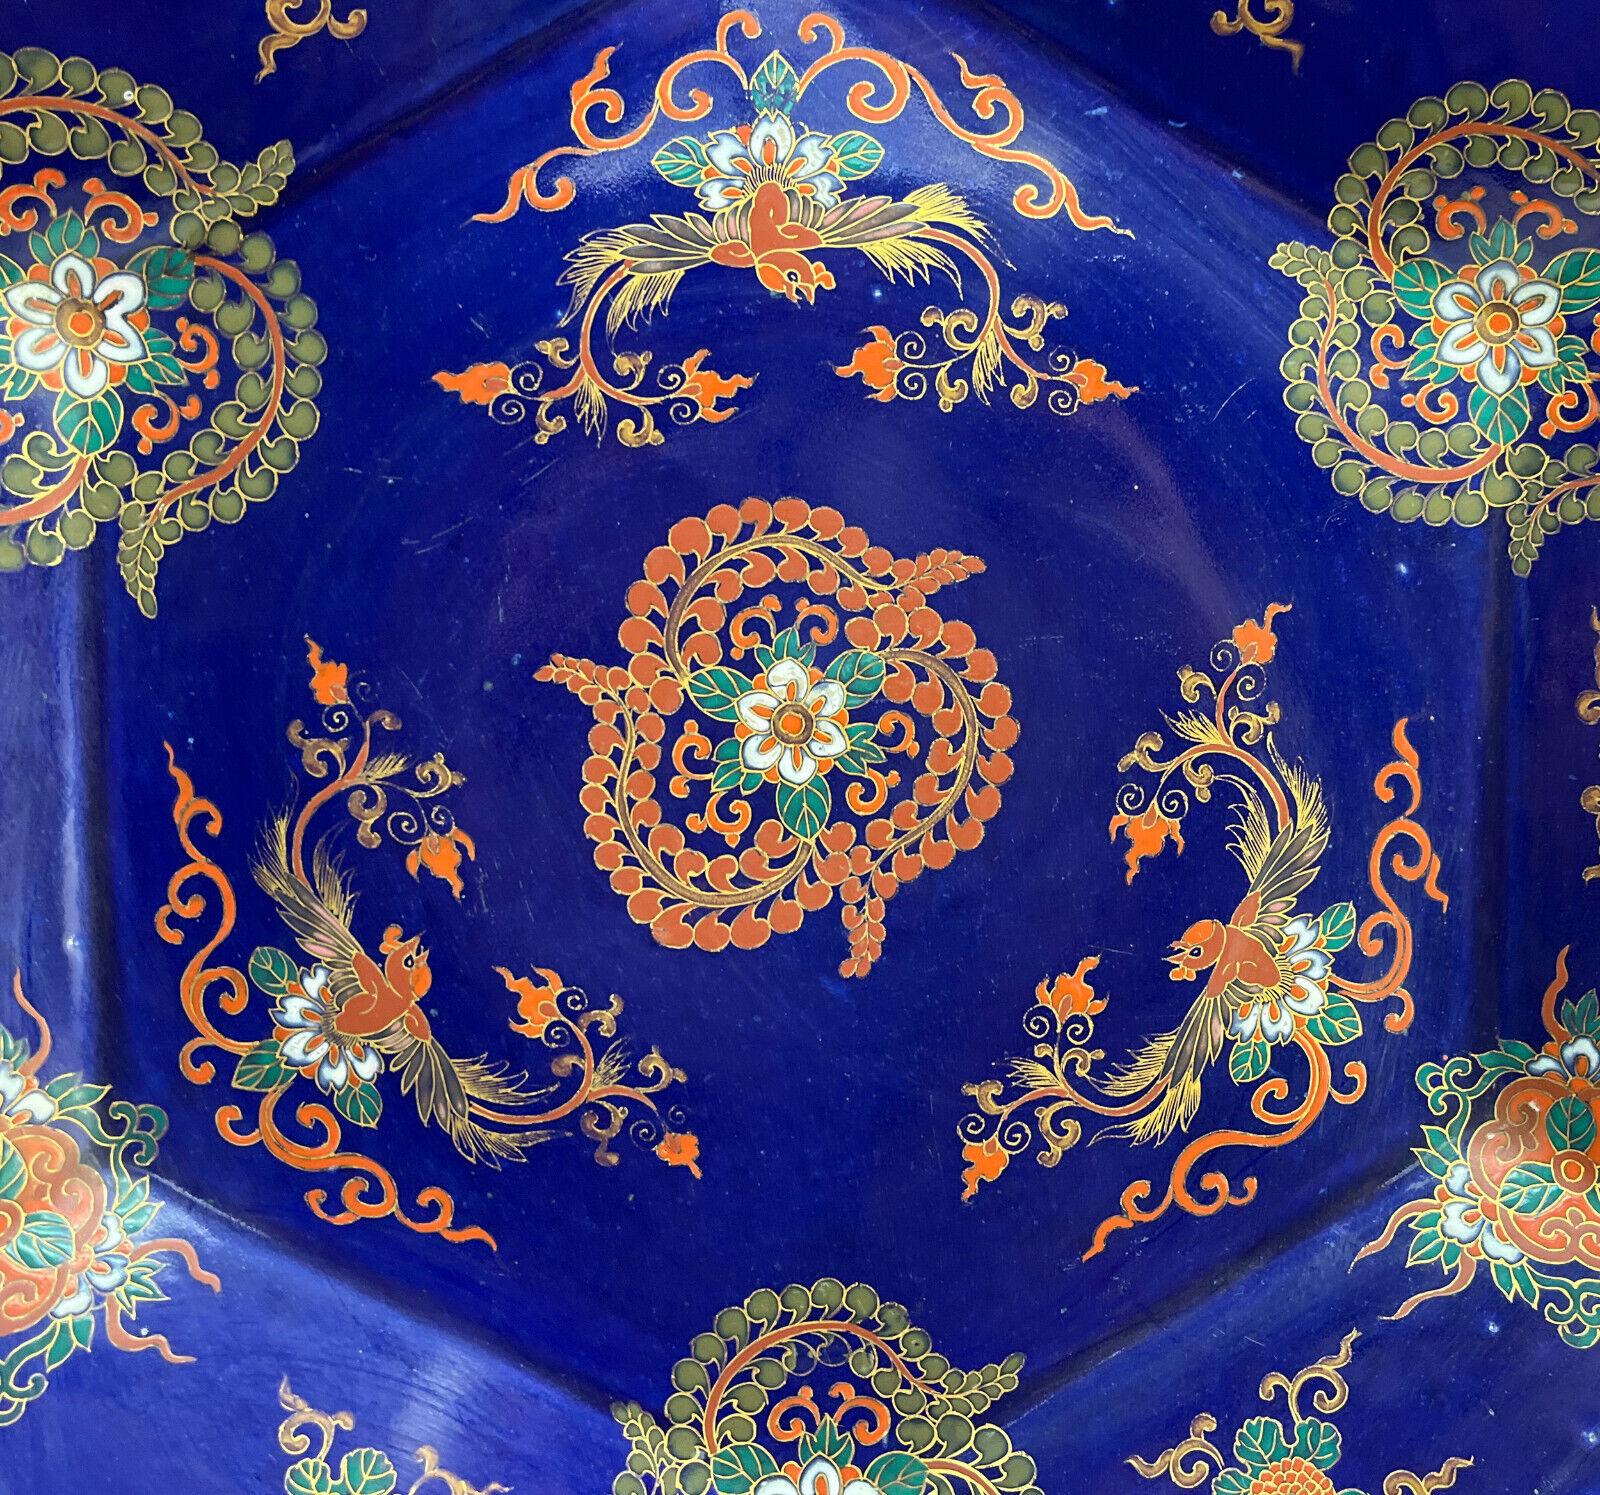 Large Chinese Porcelain Decorative Bowl, Framed, Cobalt Blue In Good Condition For Sale In Gardena, CA